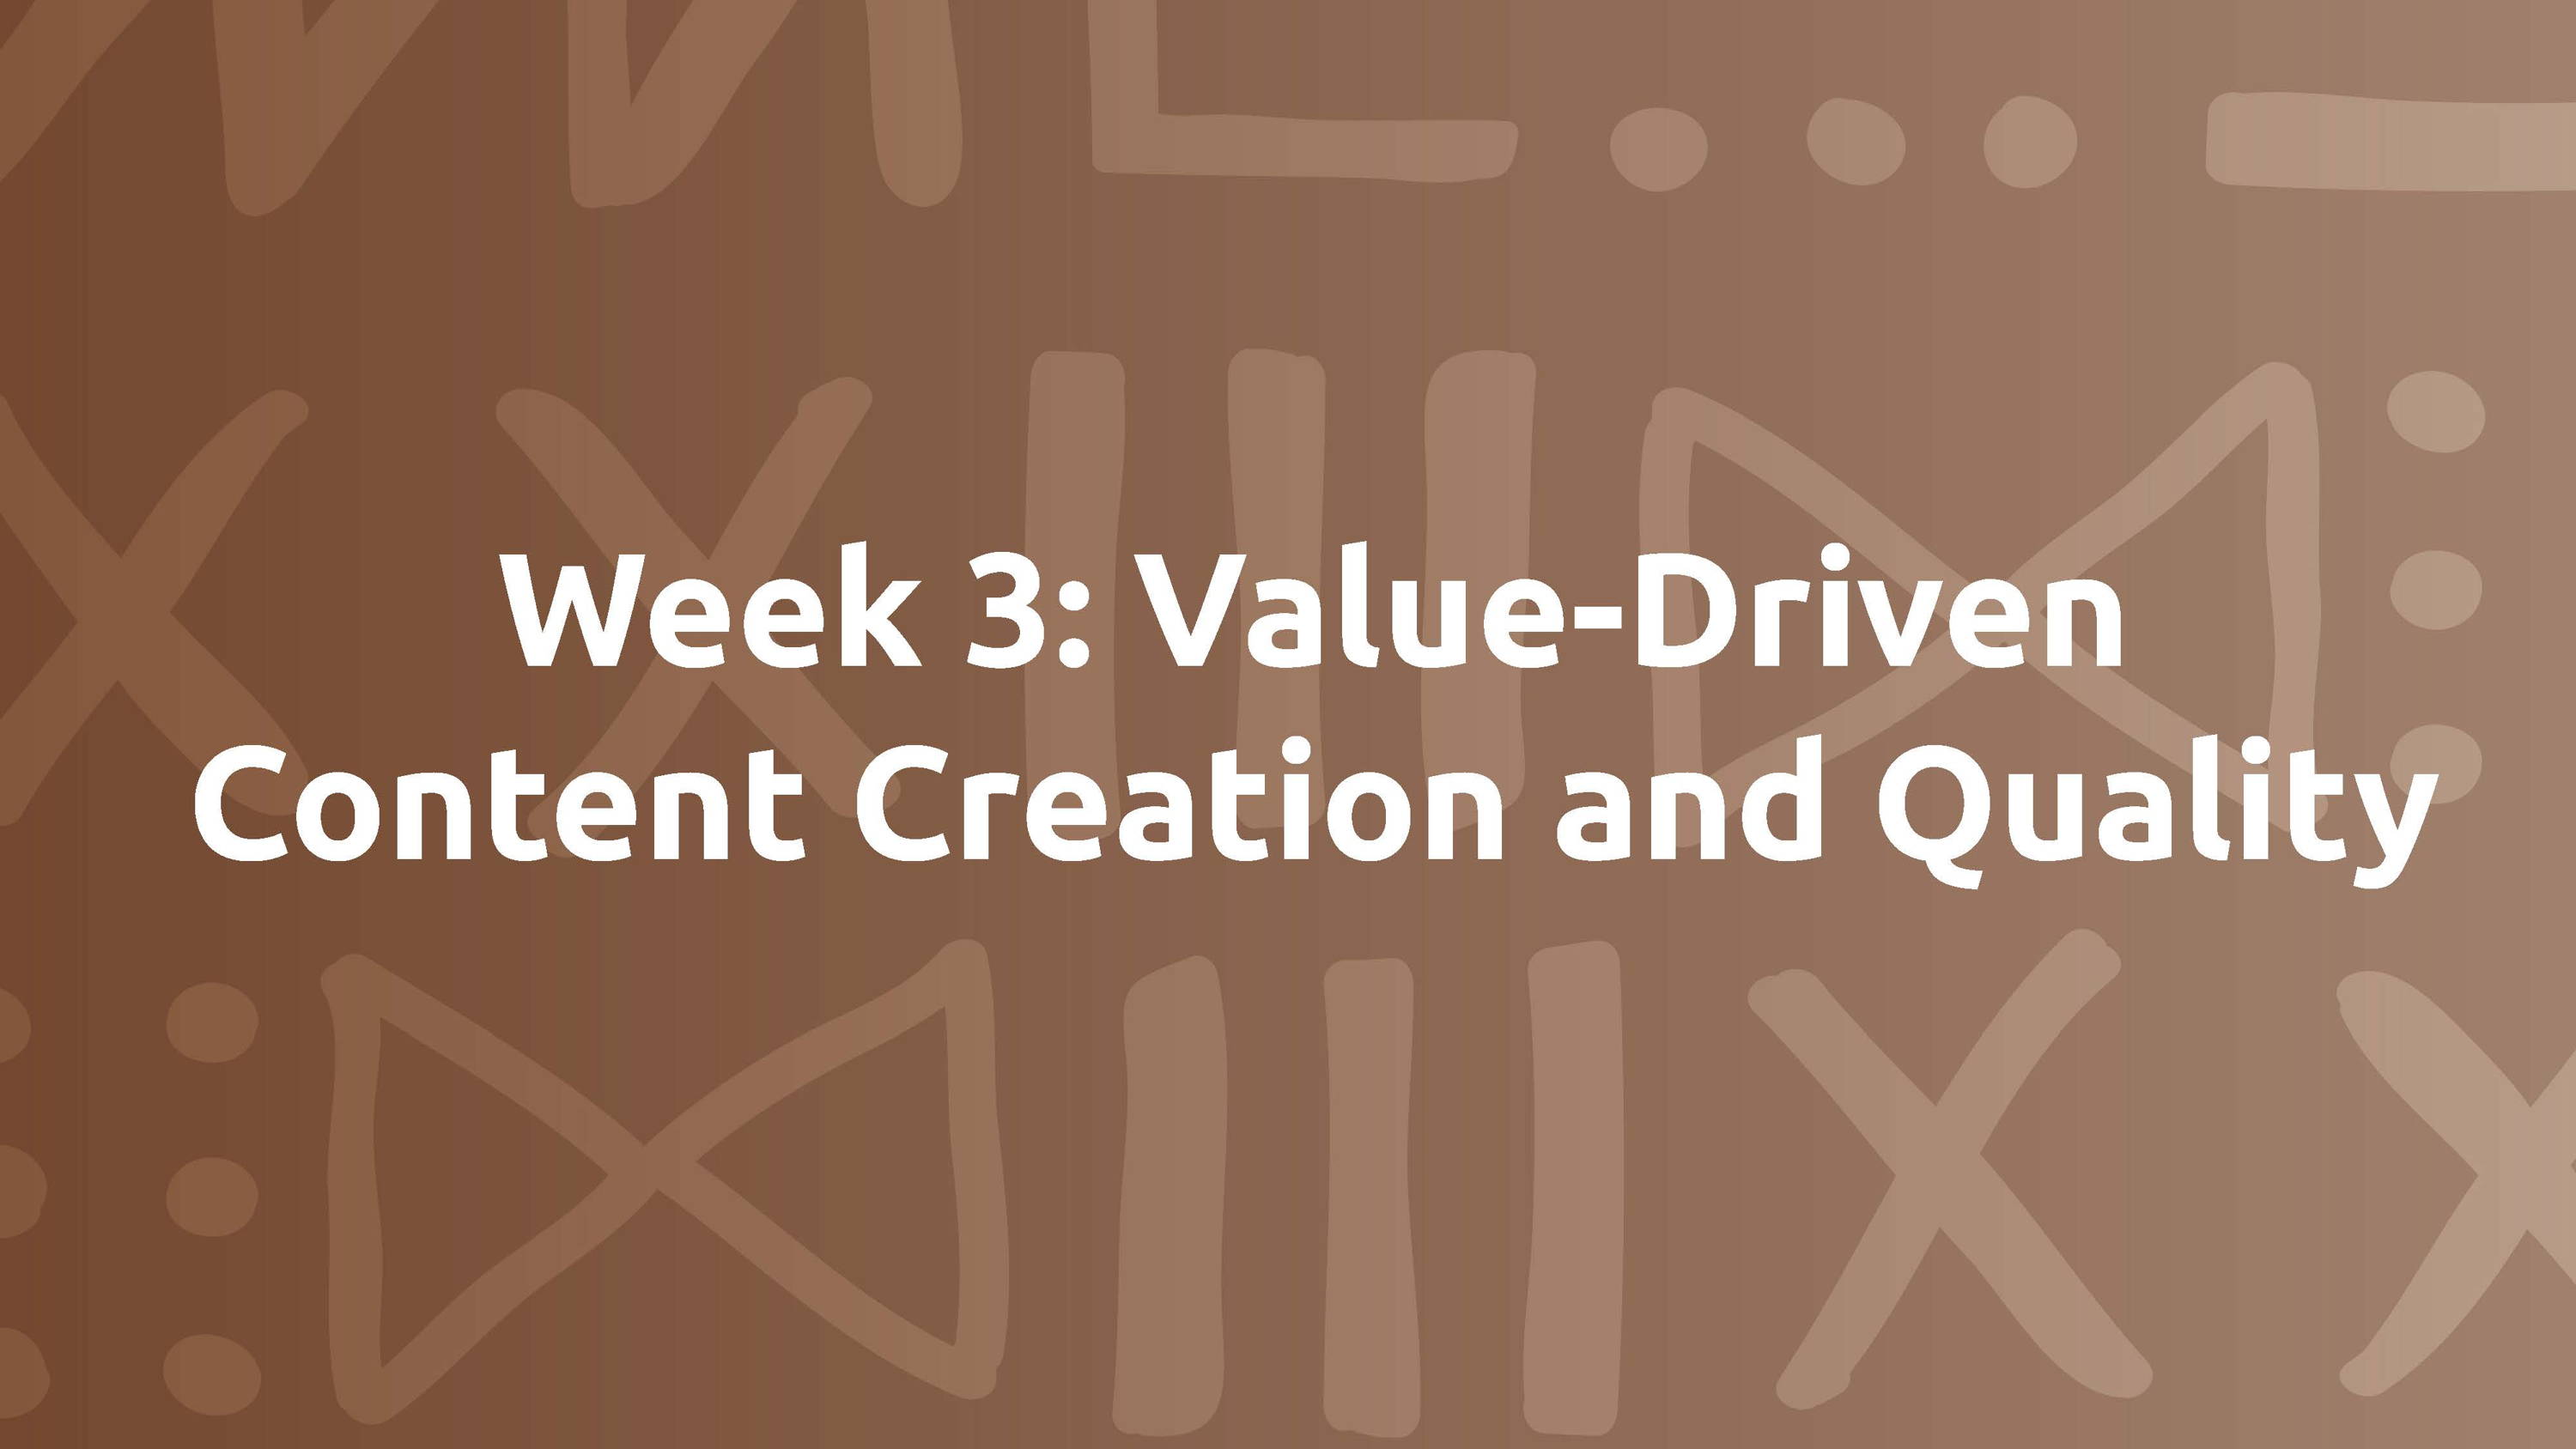 Week 3: Value-Driven Content Creation and Quality